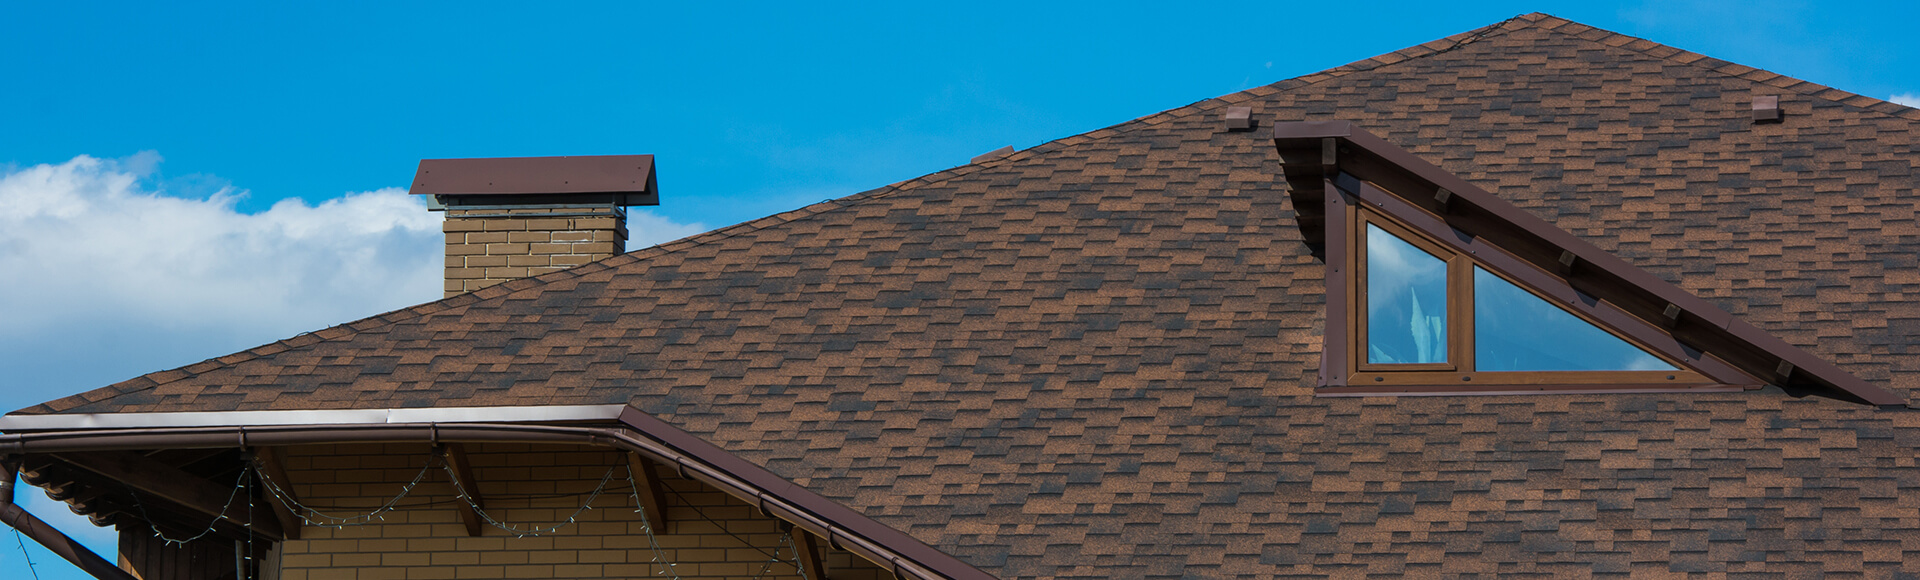 Okotoks Roofing Company, Roofing Contractor and Siding Services